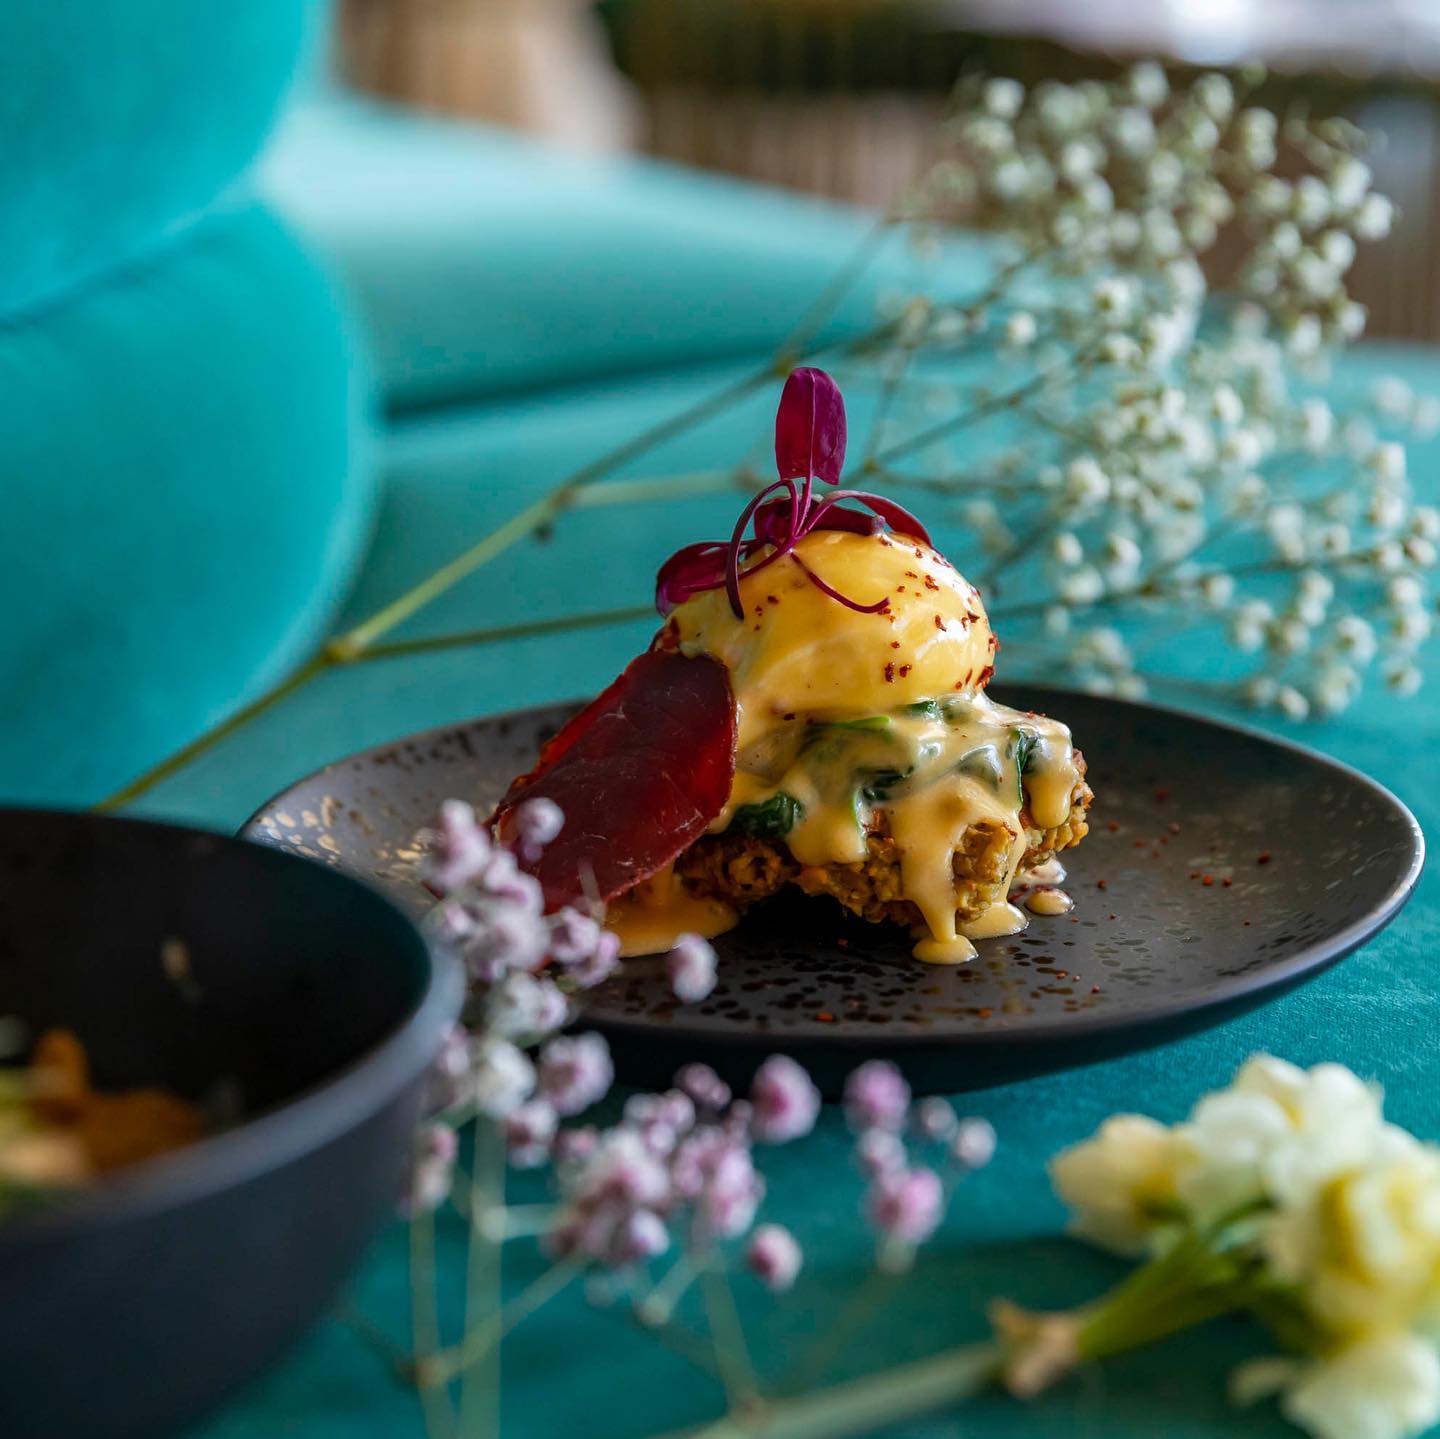 A close-up shot of a colourful brunch egg-dish, garnished with purple flowers and dripping with Hollandaise sauce.